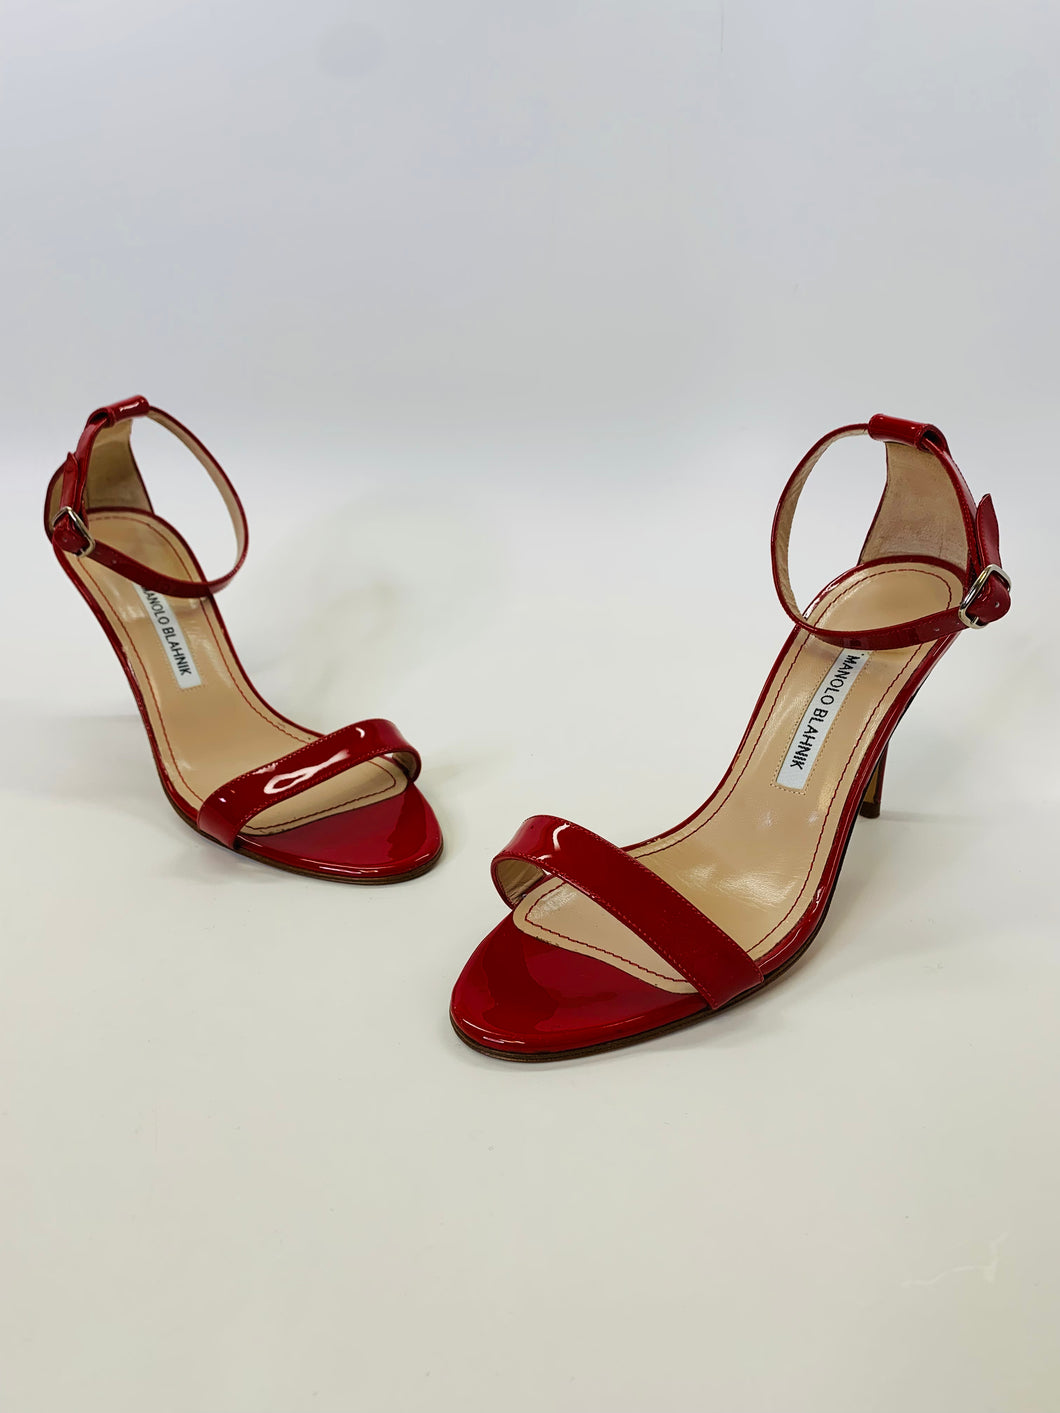 Manolo Blahnik Red Patent Leather Chaos 95mm Sandals Size 39 1/2